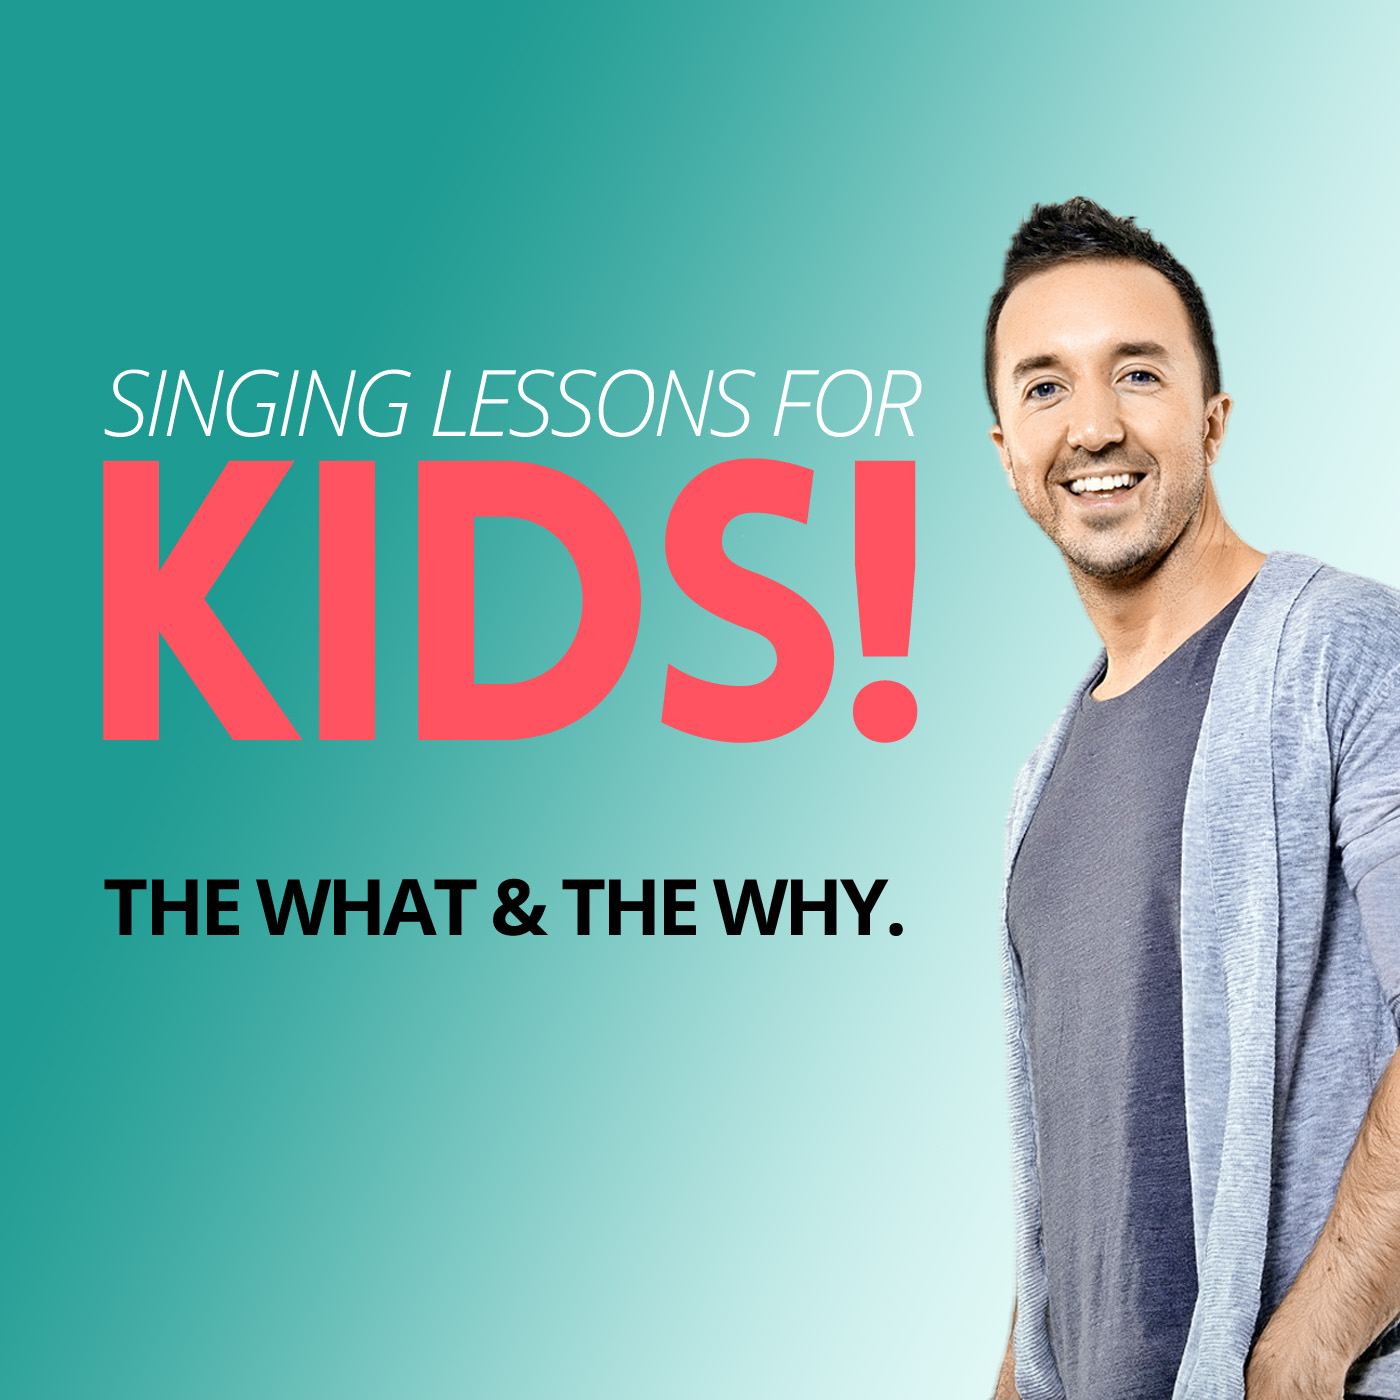 Singing Lessons For Kids. The What & The Why.